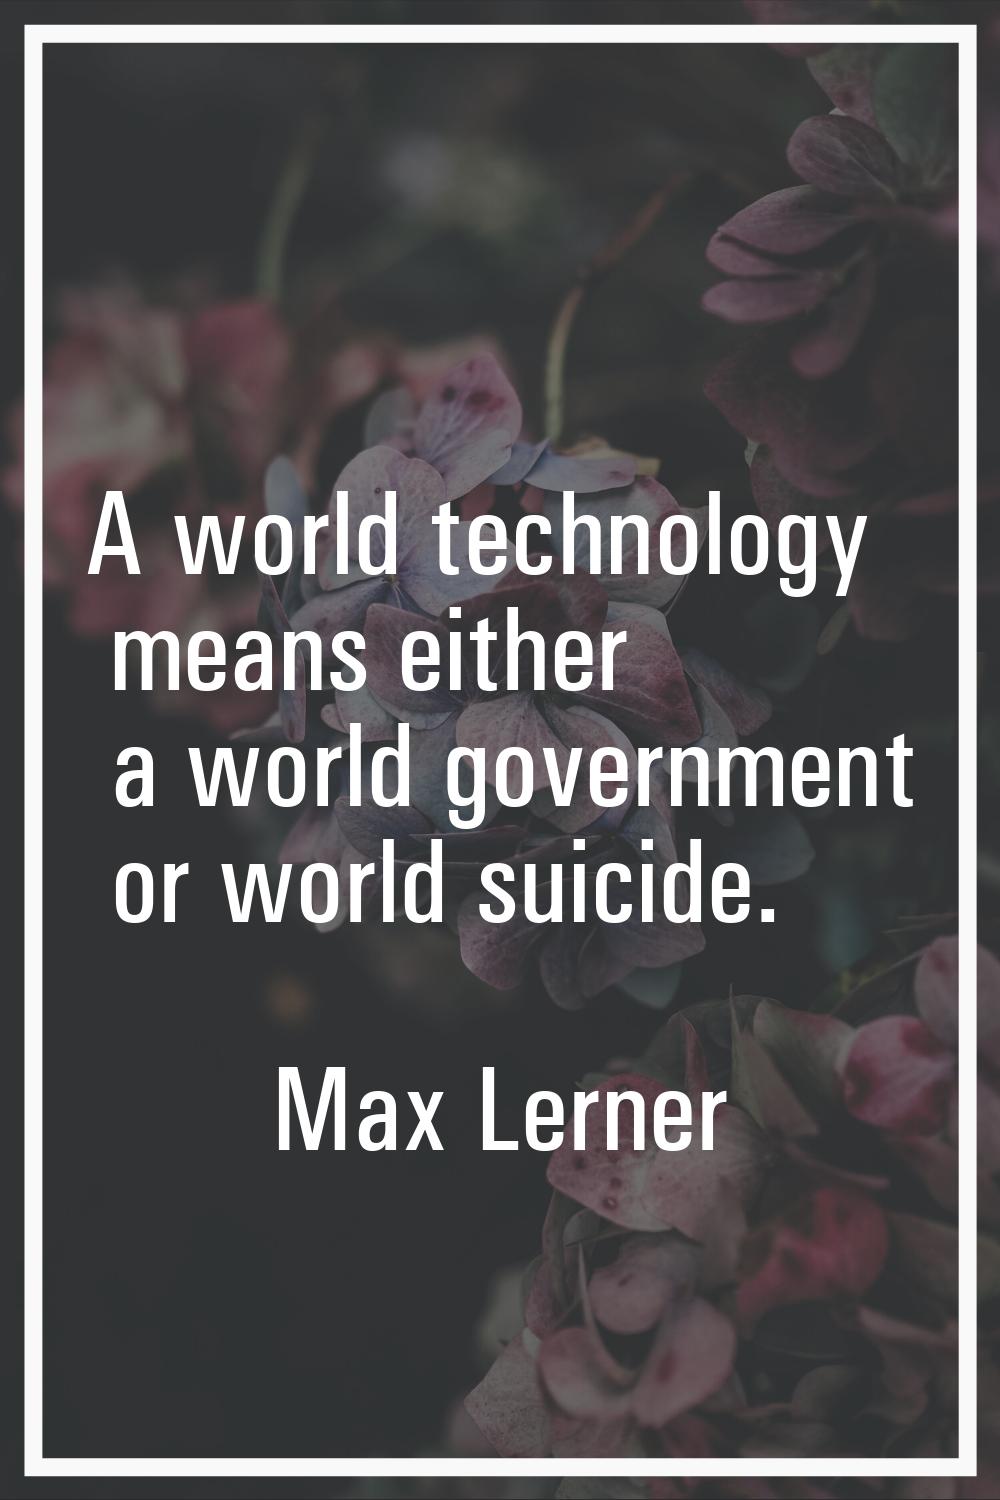 A world technology means either a world government or world suicide.